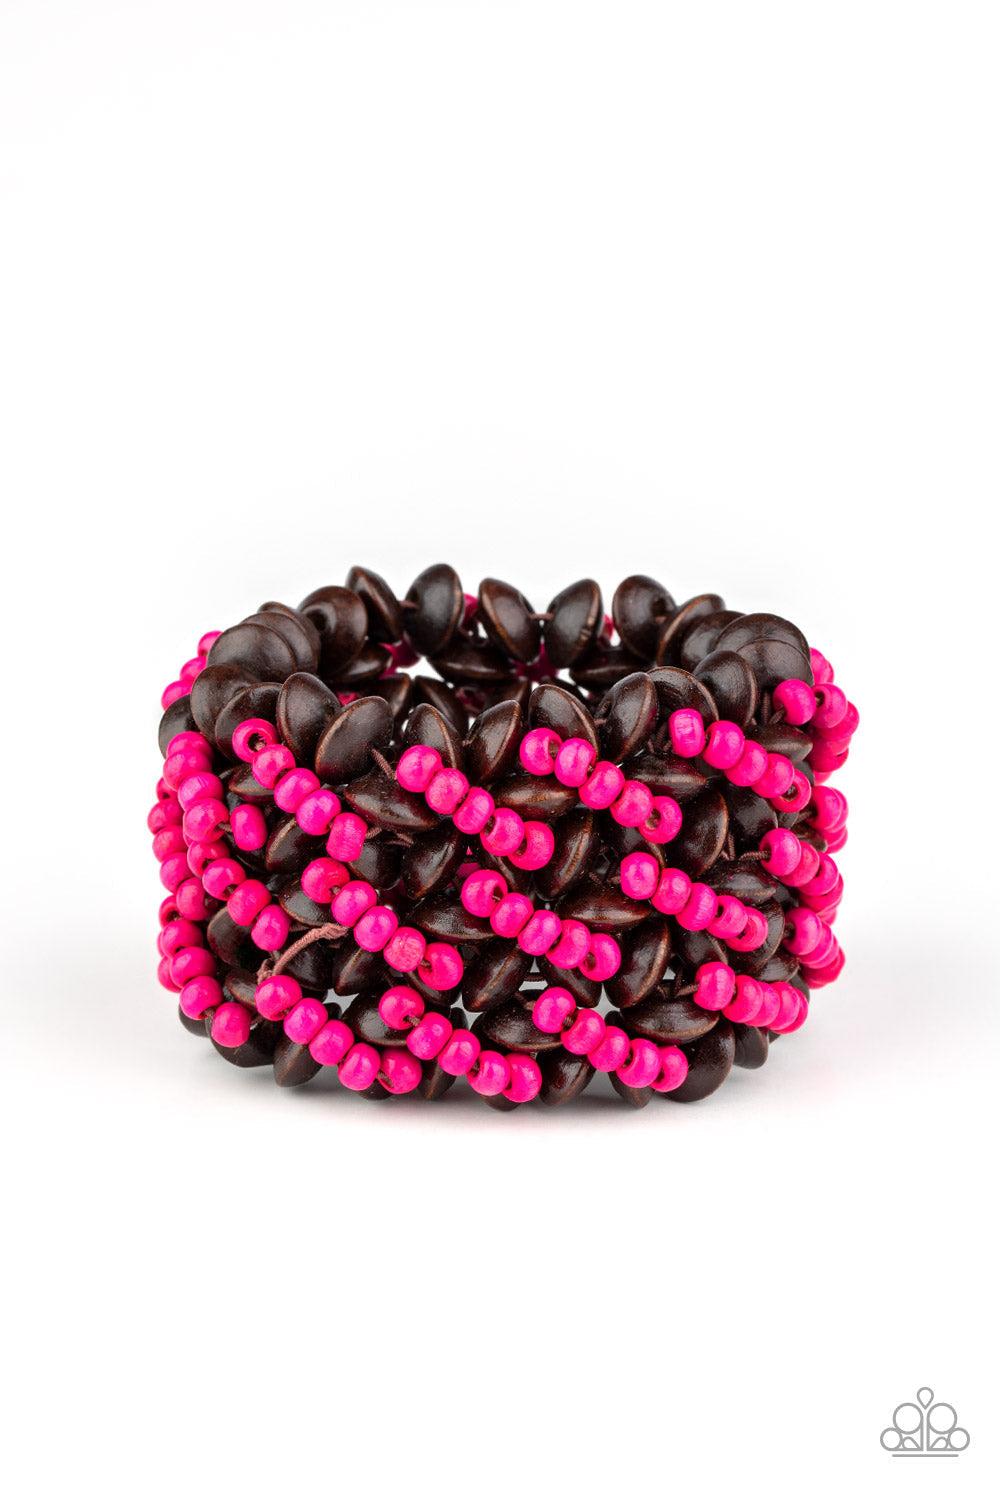 Cozy in Cozumel - Pink and Brown Wood Bracelet - Paparazzi Accessories - A collection of dainty pink wooden beads and brown wooden discs are threaded along knotted stretchy bands, creating a tropical floral pattern around the wrist. Sold as one individual bracelet.